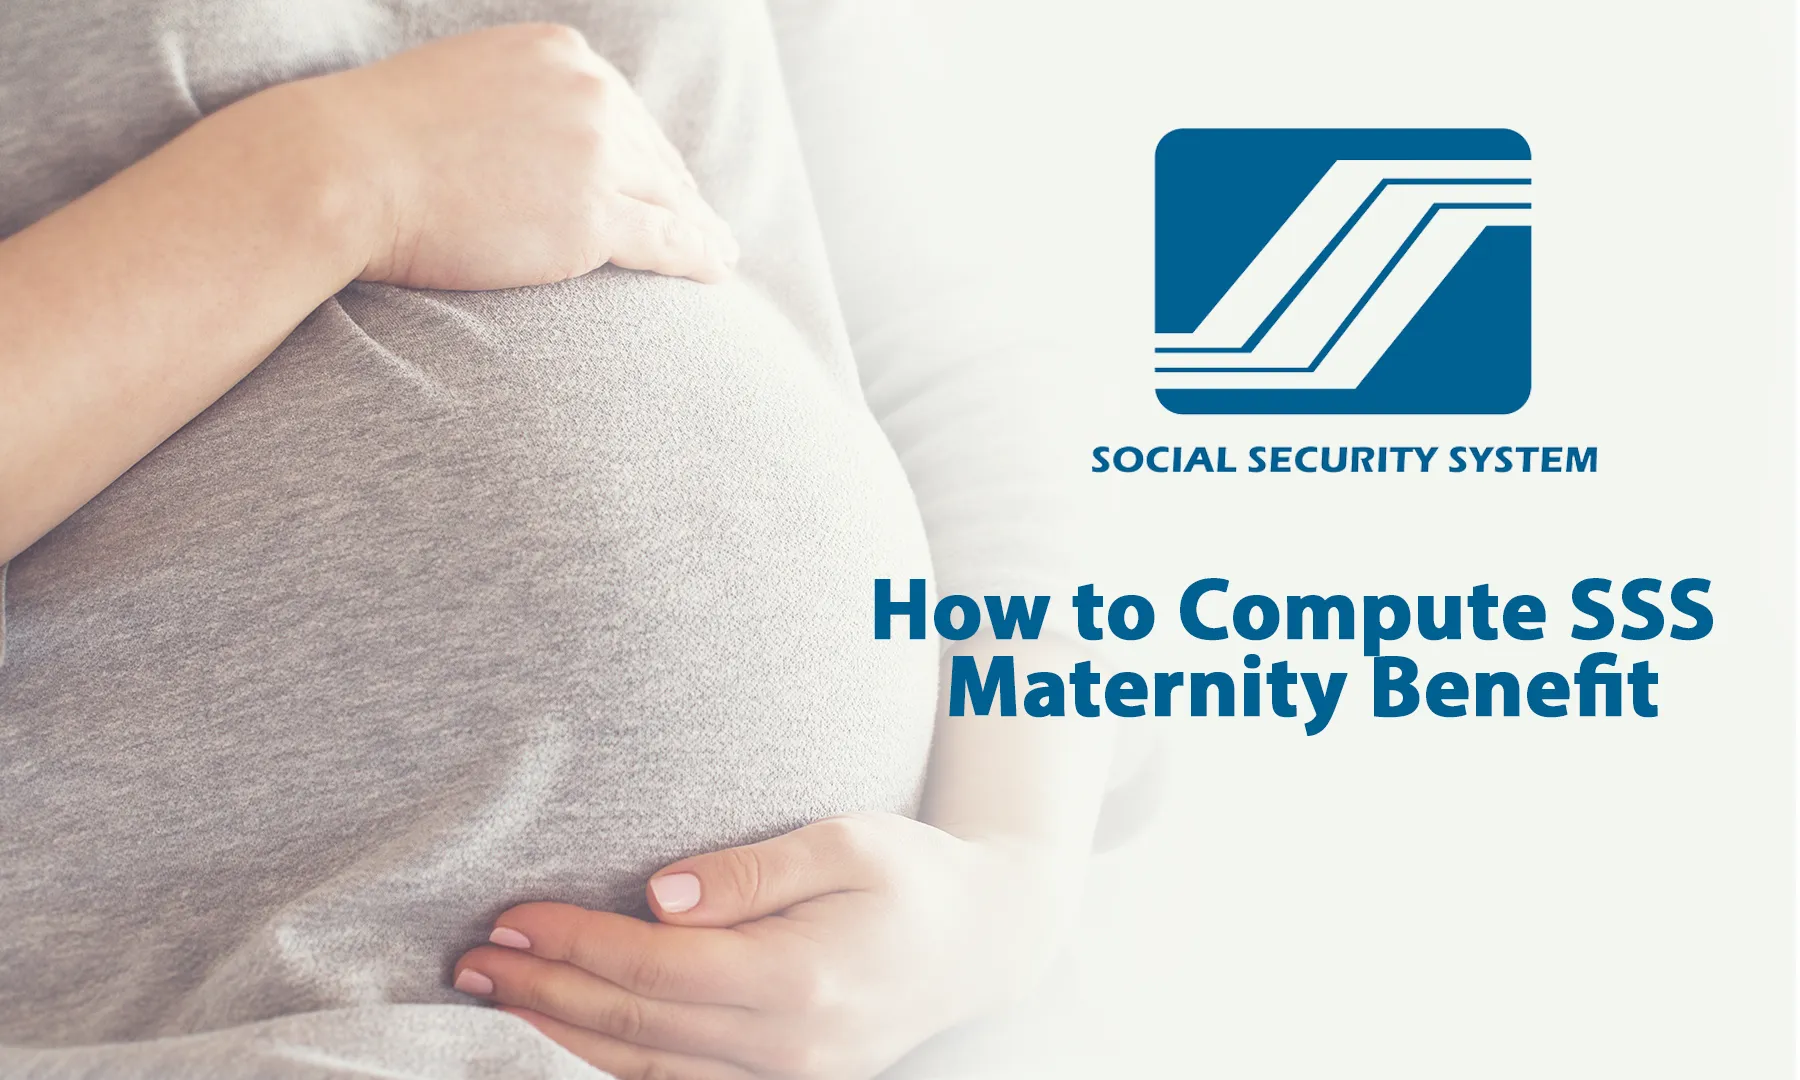 How to Compute SSS Maternity Benefit